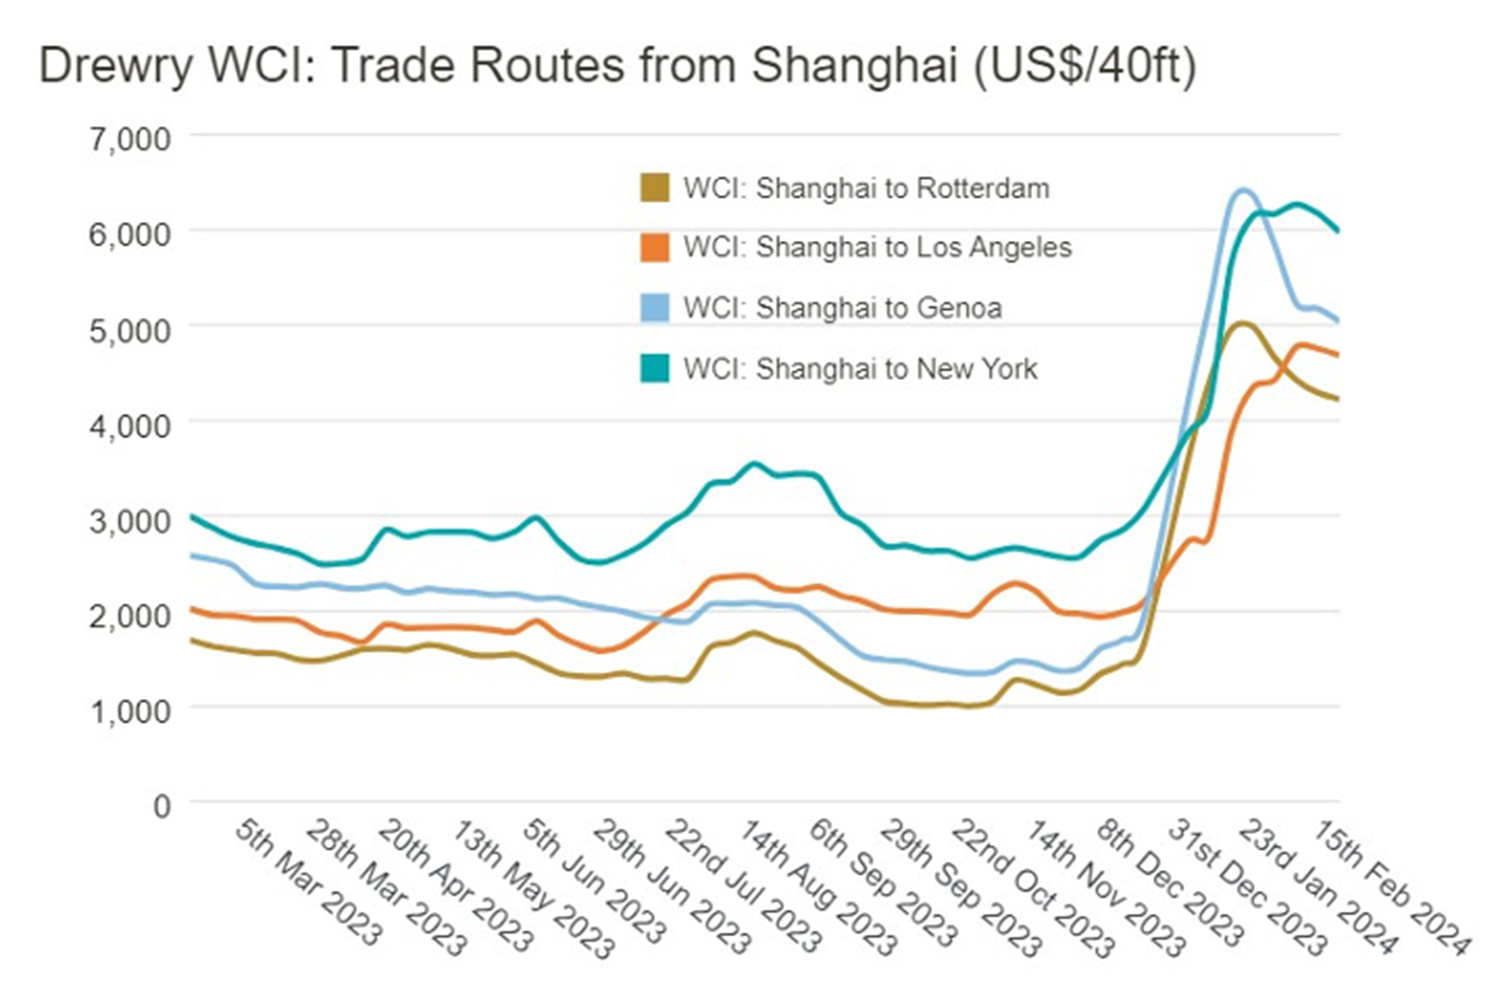 Graphic showing Trade Routes from Shanghai (USD/40-foot) with data from Drewry World Container Index